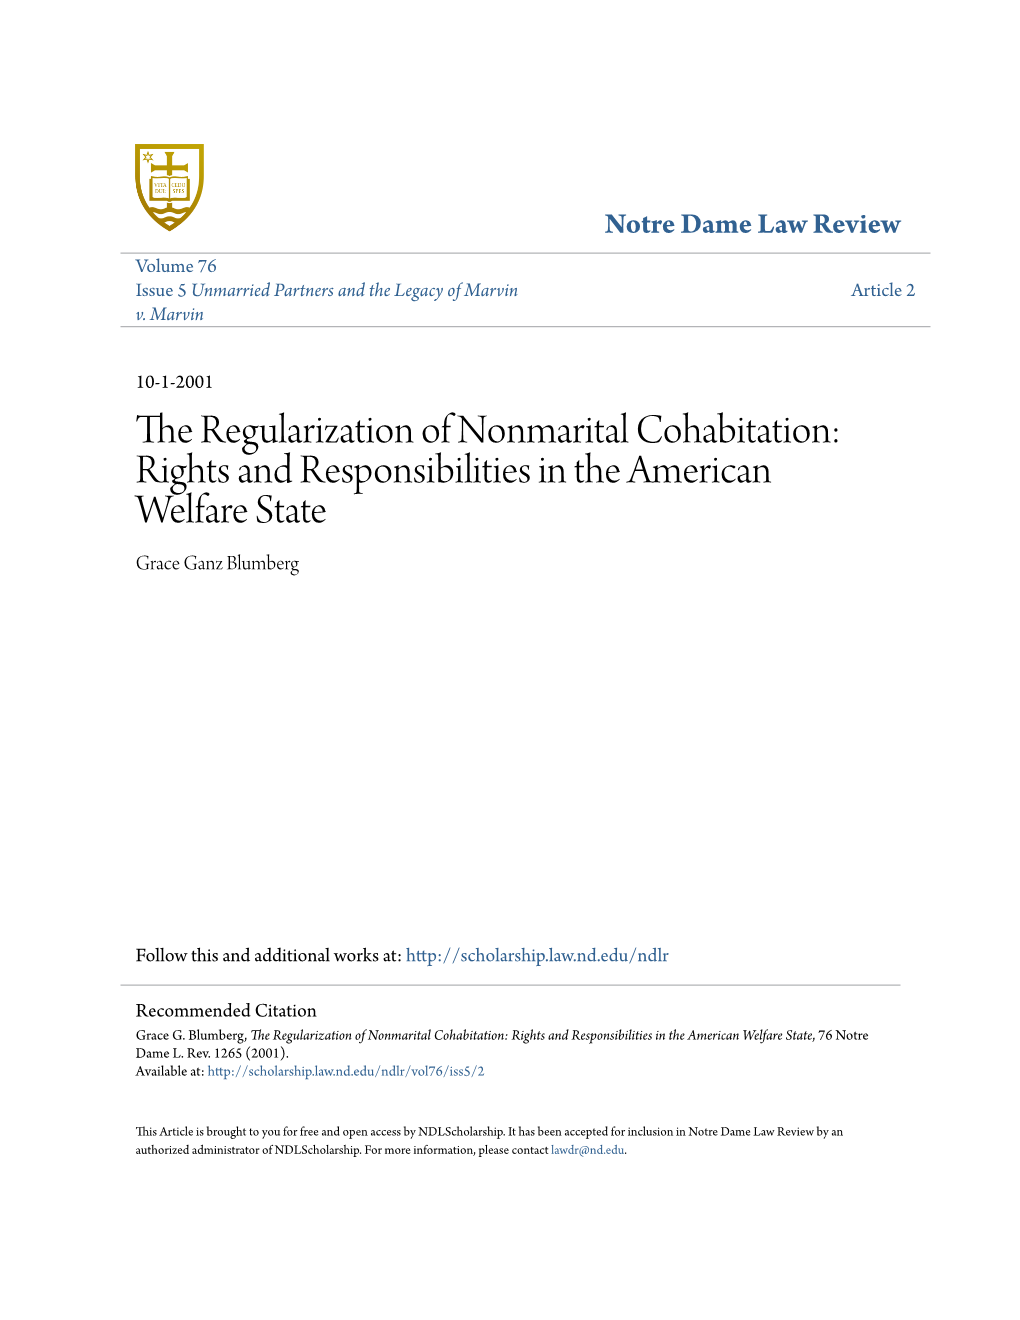 The Regularization of Nonmarital Cohabitation: Rights and Responsibilities in the American Welfare State Grace Ganz Blumberg